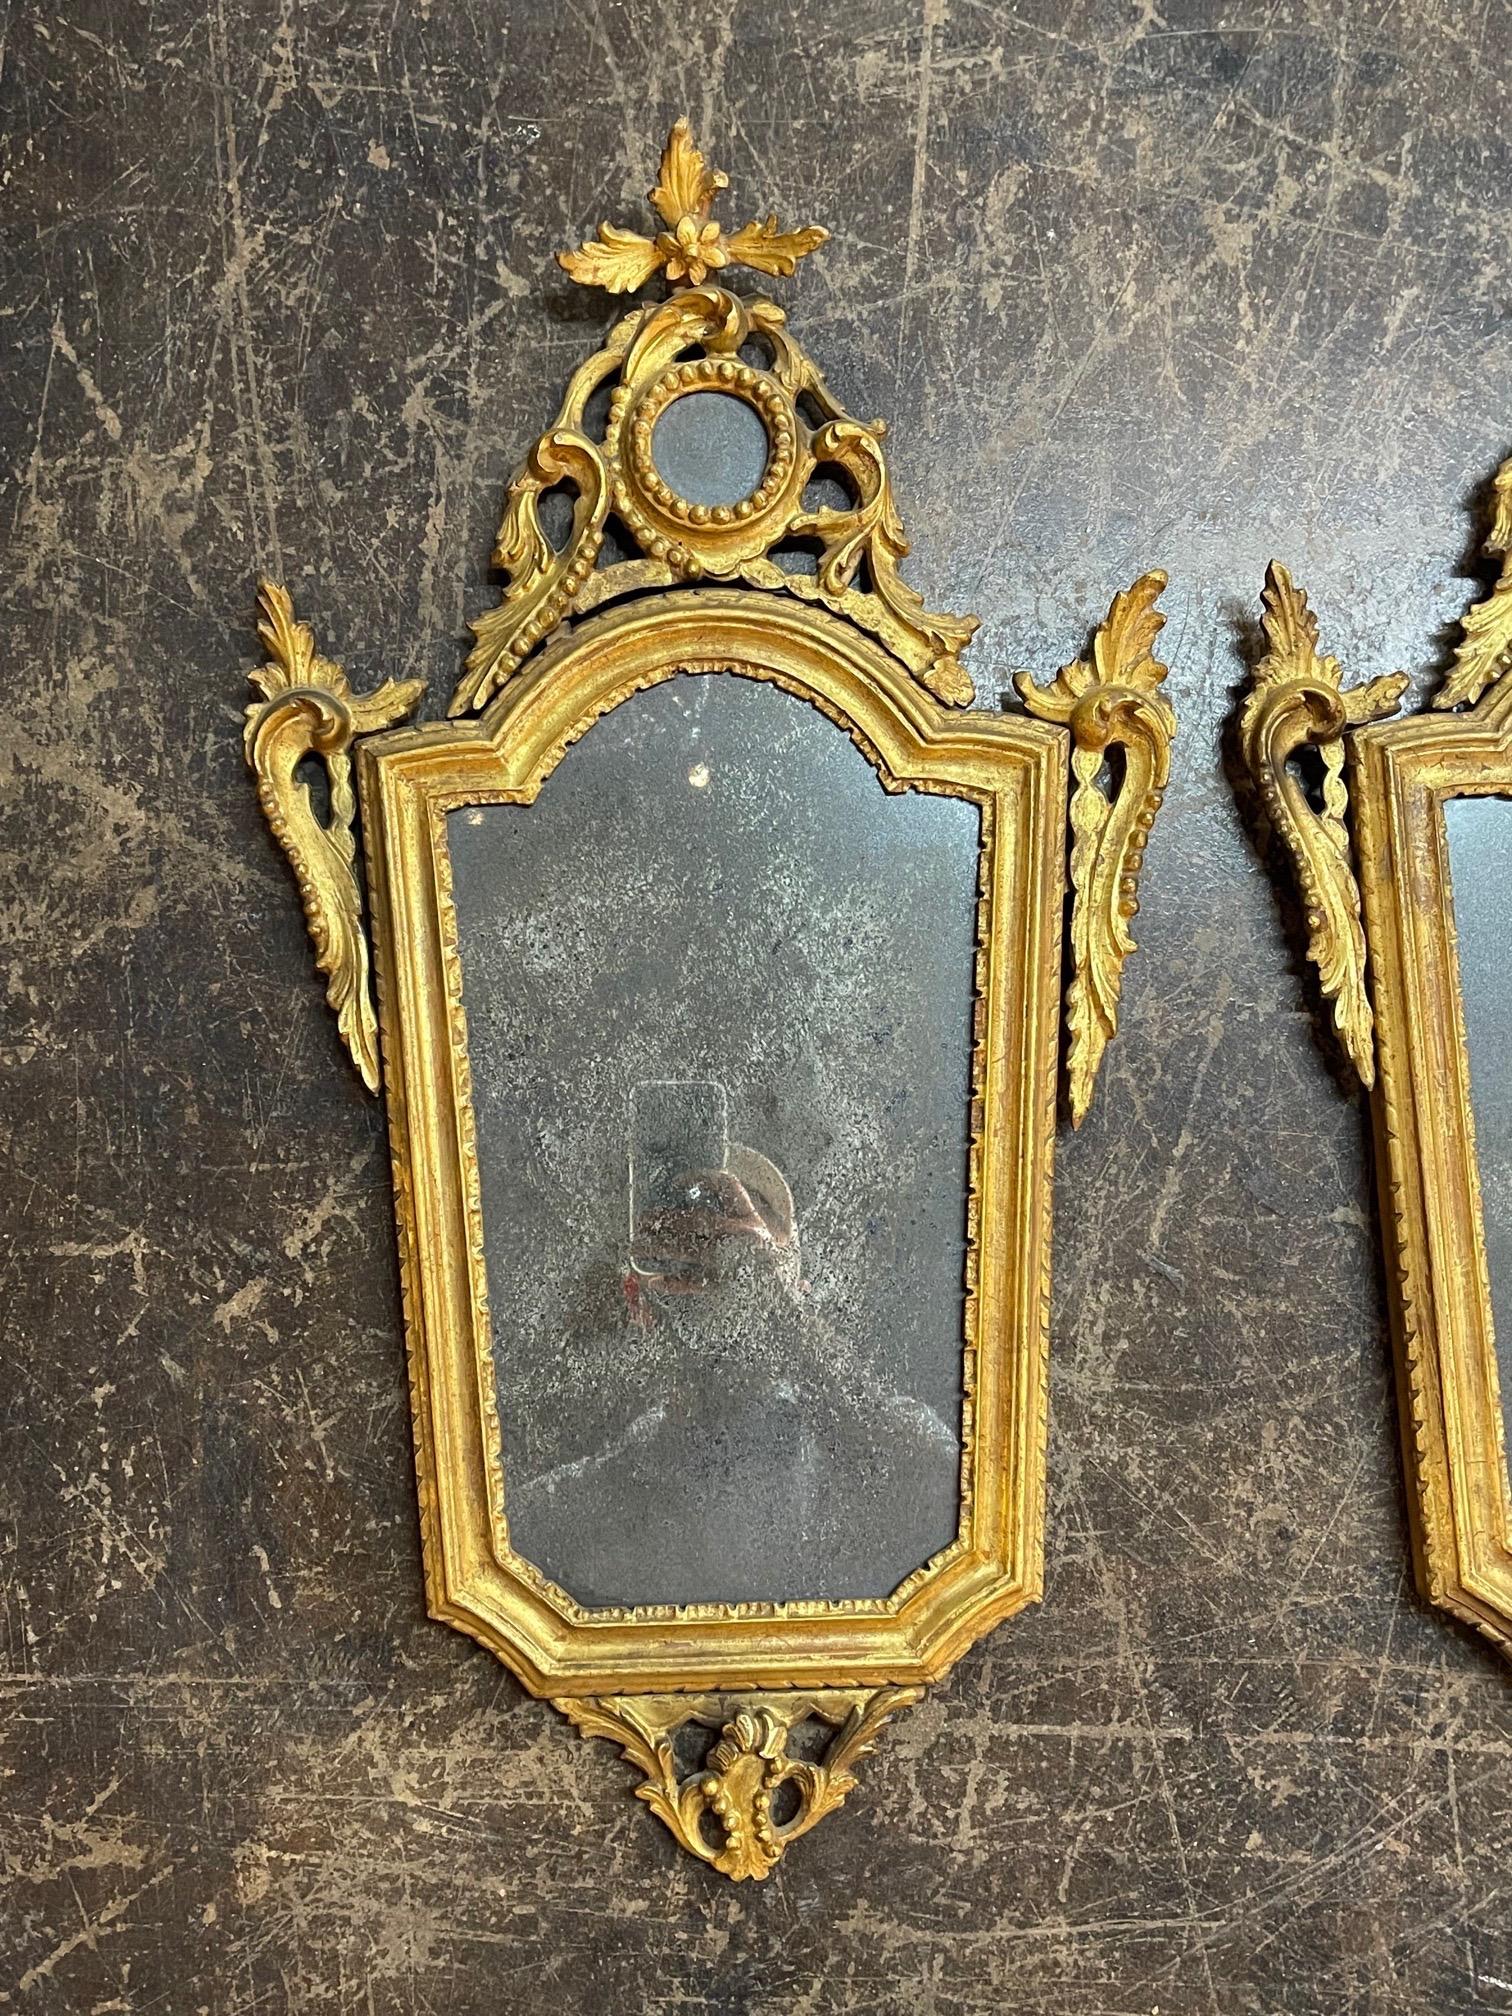 Beautiful pair of 19th century Italian carved and painted giltwood mirrors. Fine carvings including floral images with a small mirror inside at the top. Wonderful accessories for a fine home!